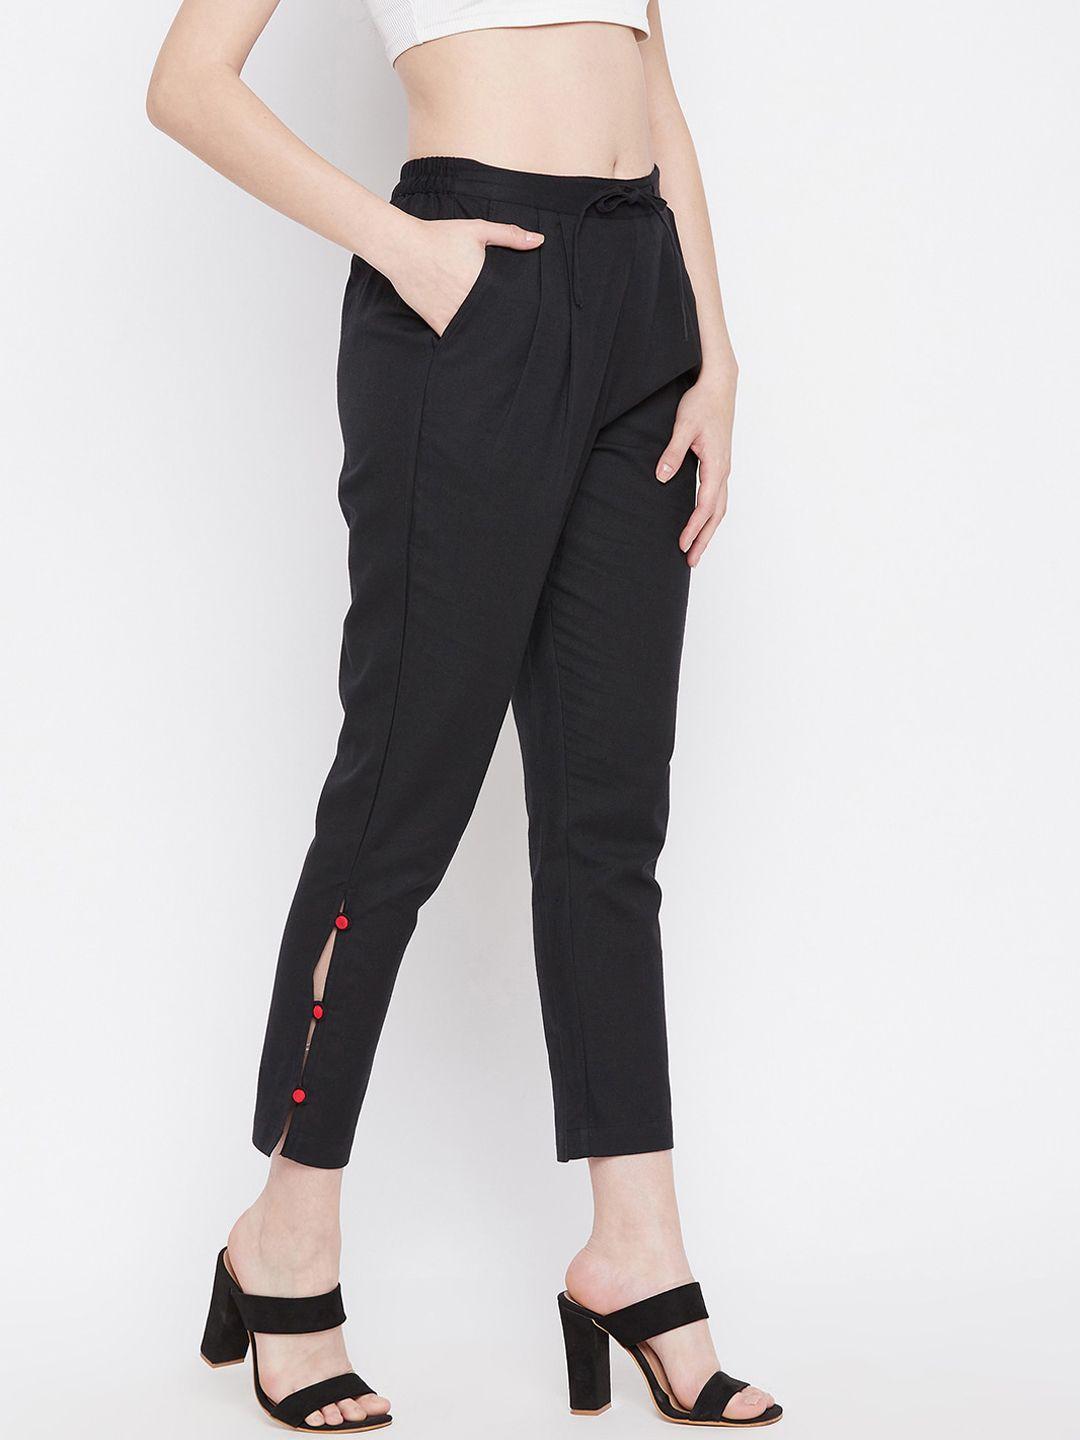 winered-women-black-solid-trousers